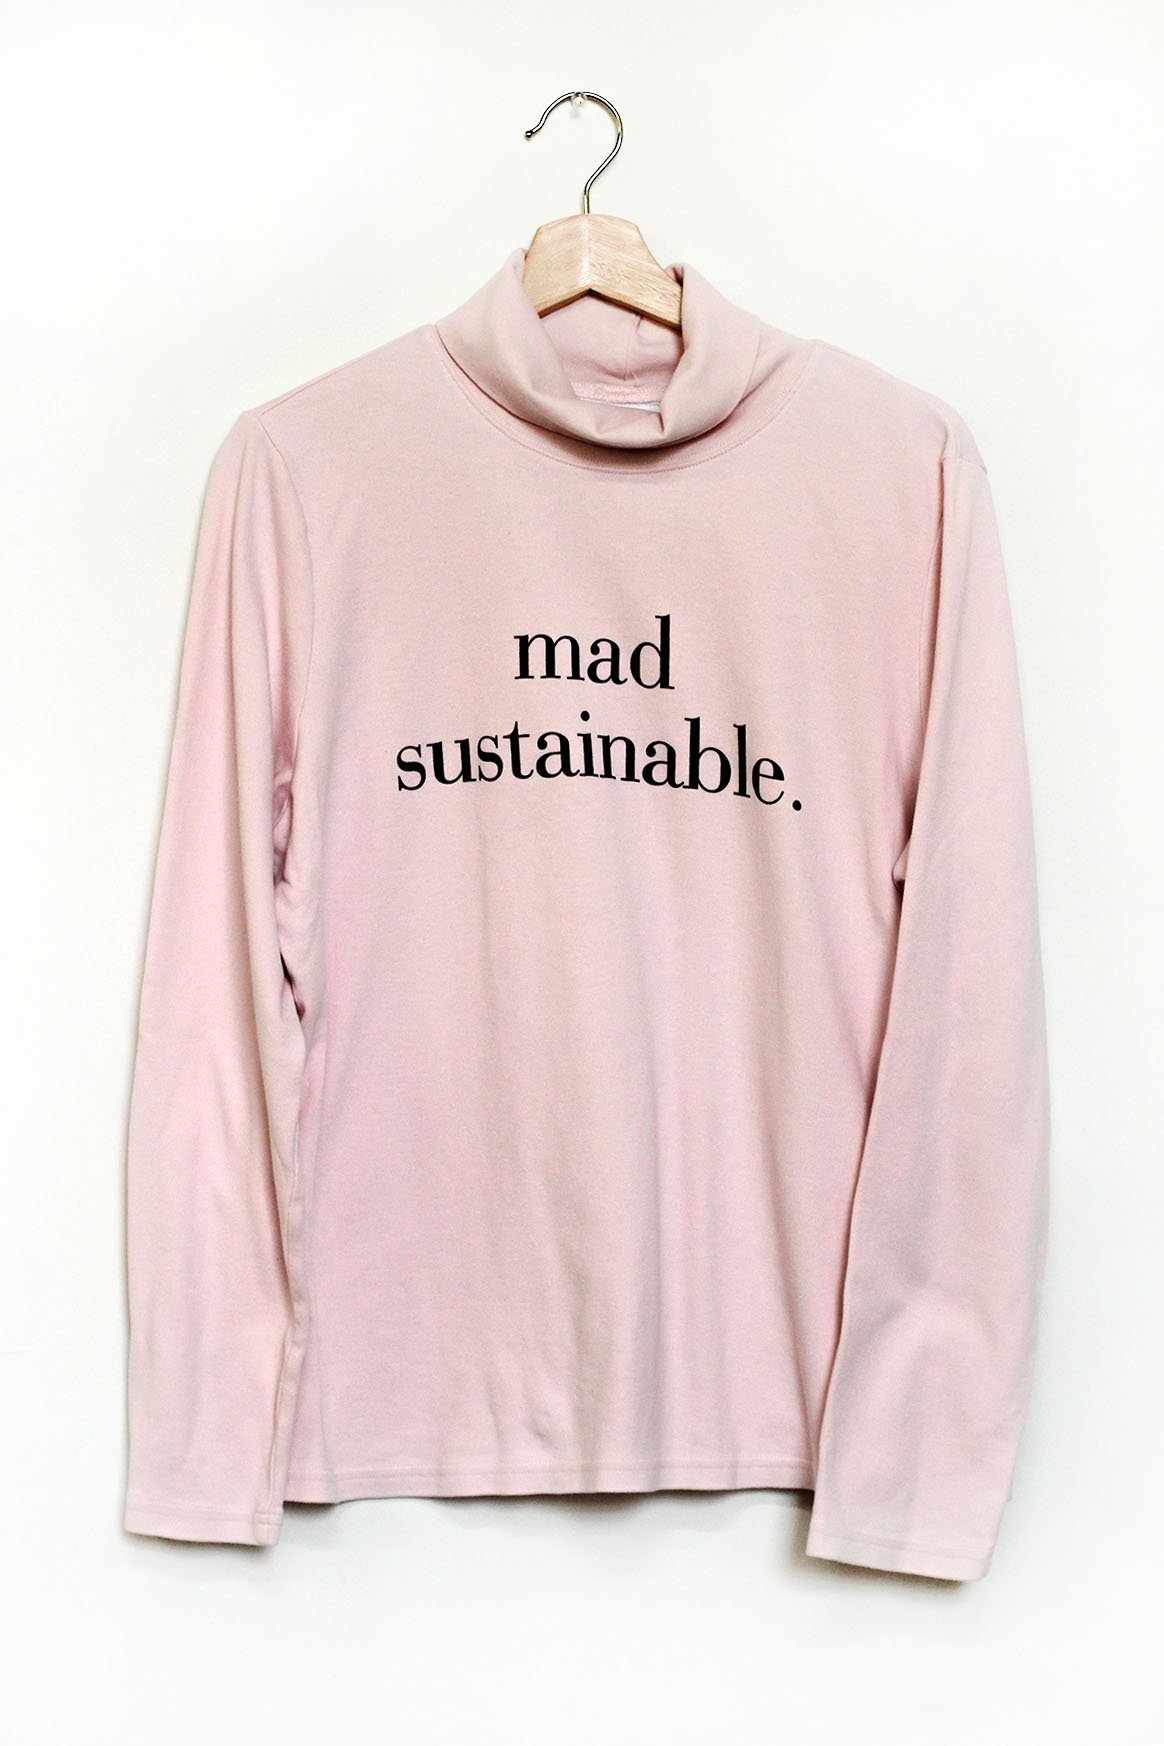 mad sustainable short from grant blvd